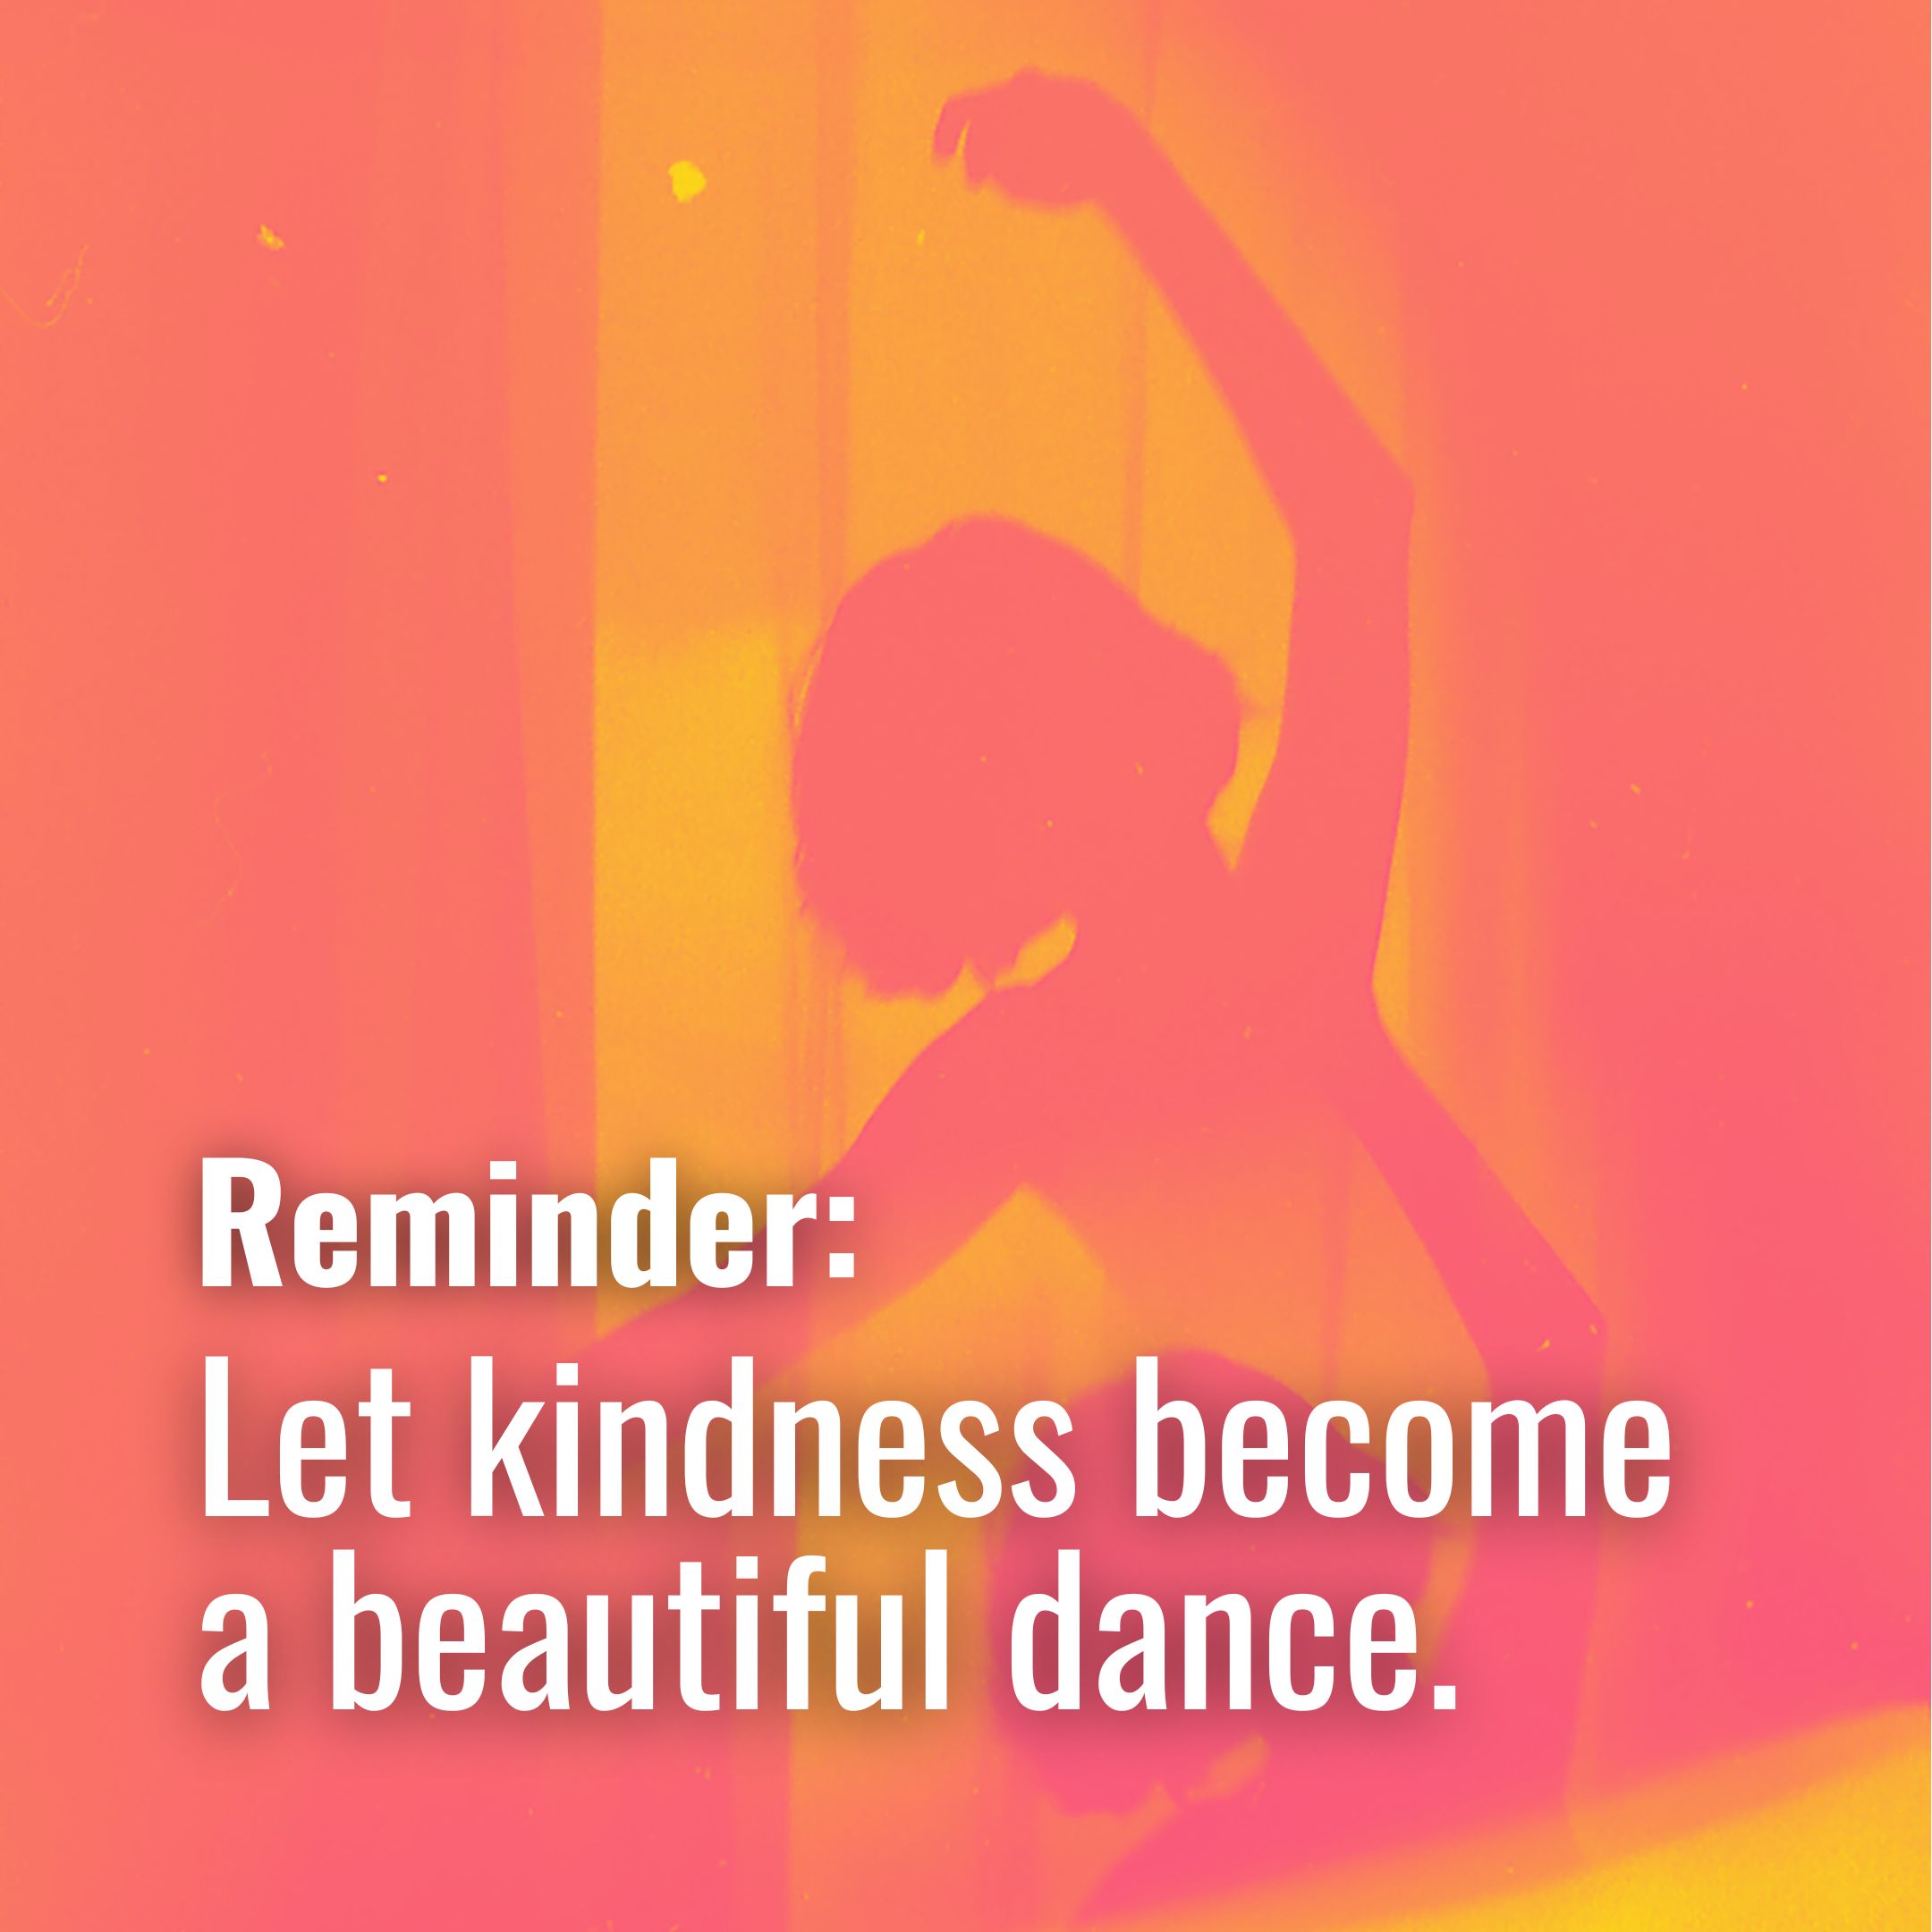 Let kindness become a beautiful dance.